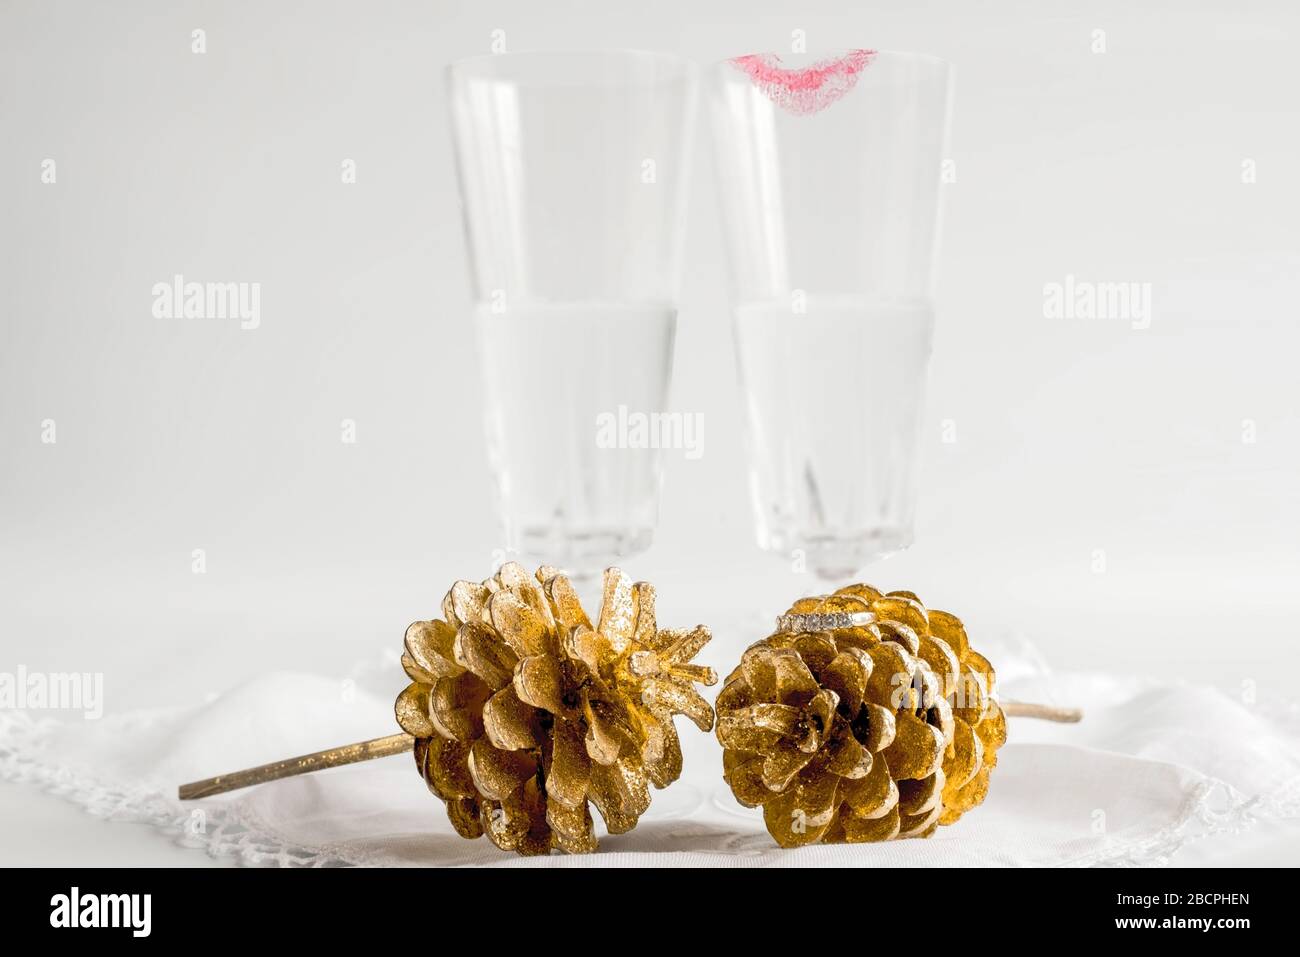 Two champagne glasses, one with lipstick, behind two gold fern cones. Diamond ring placed on one cone. Celebrating engagement, civil ceremony, wedding. Stock Photo